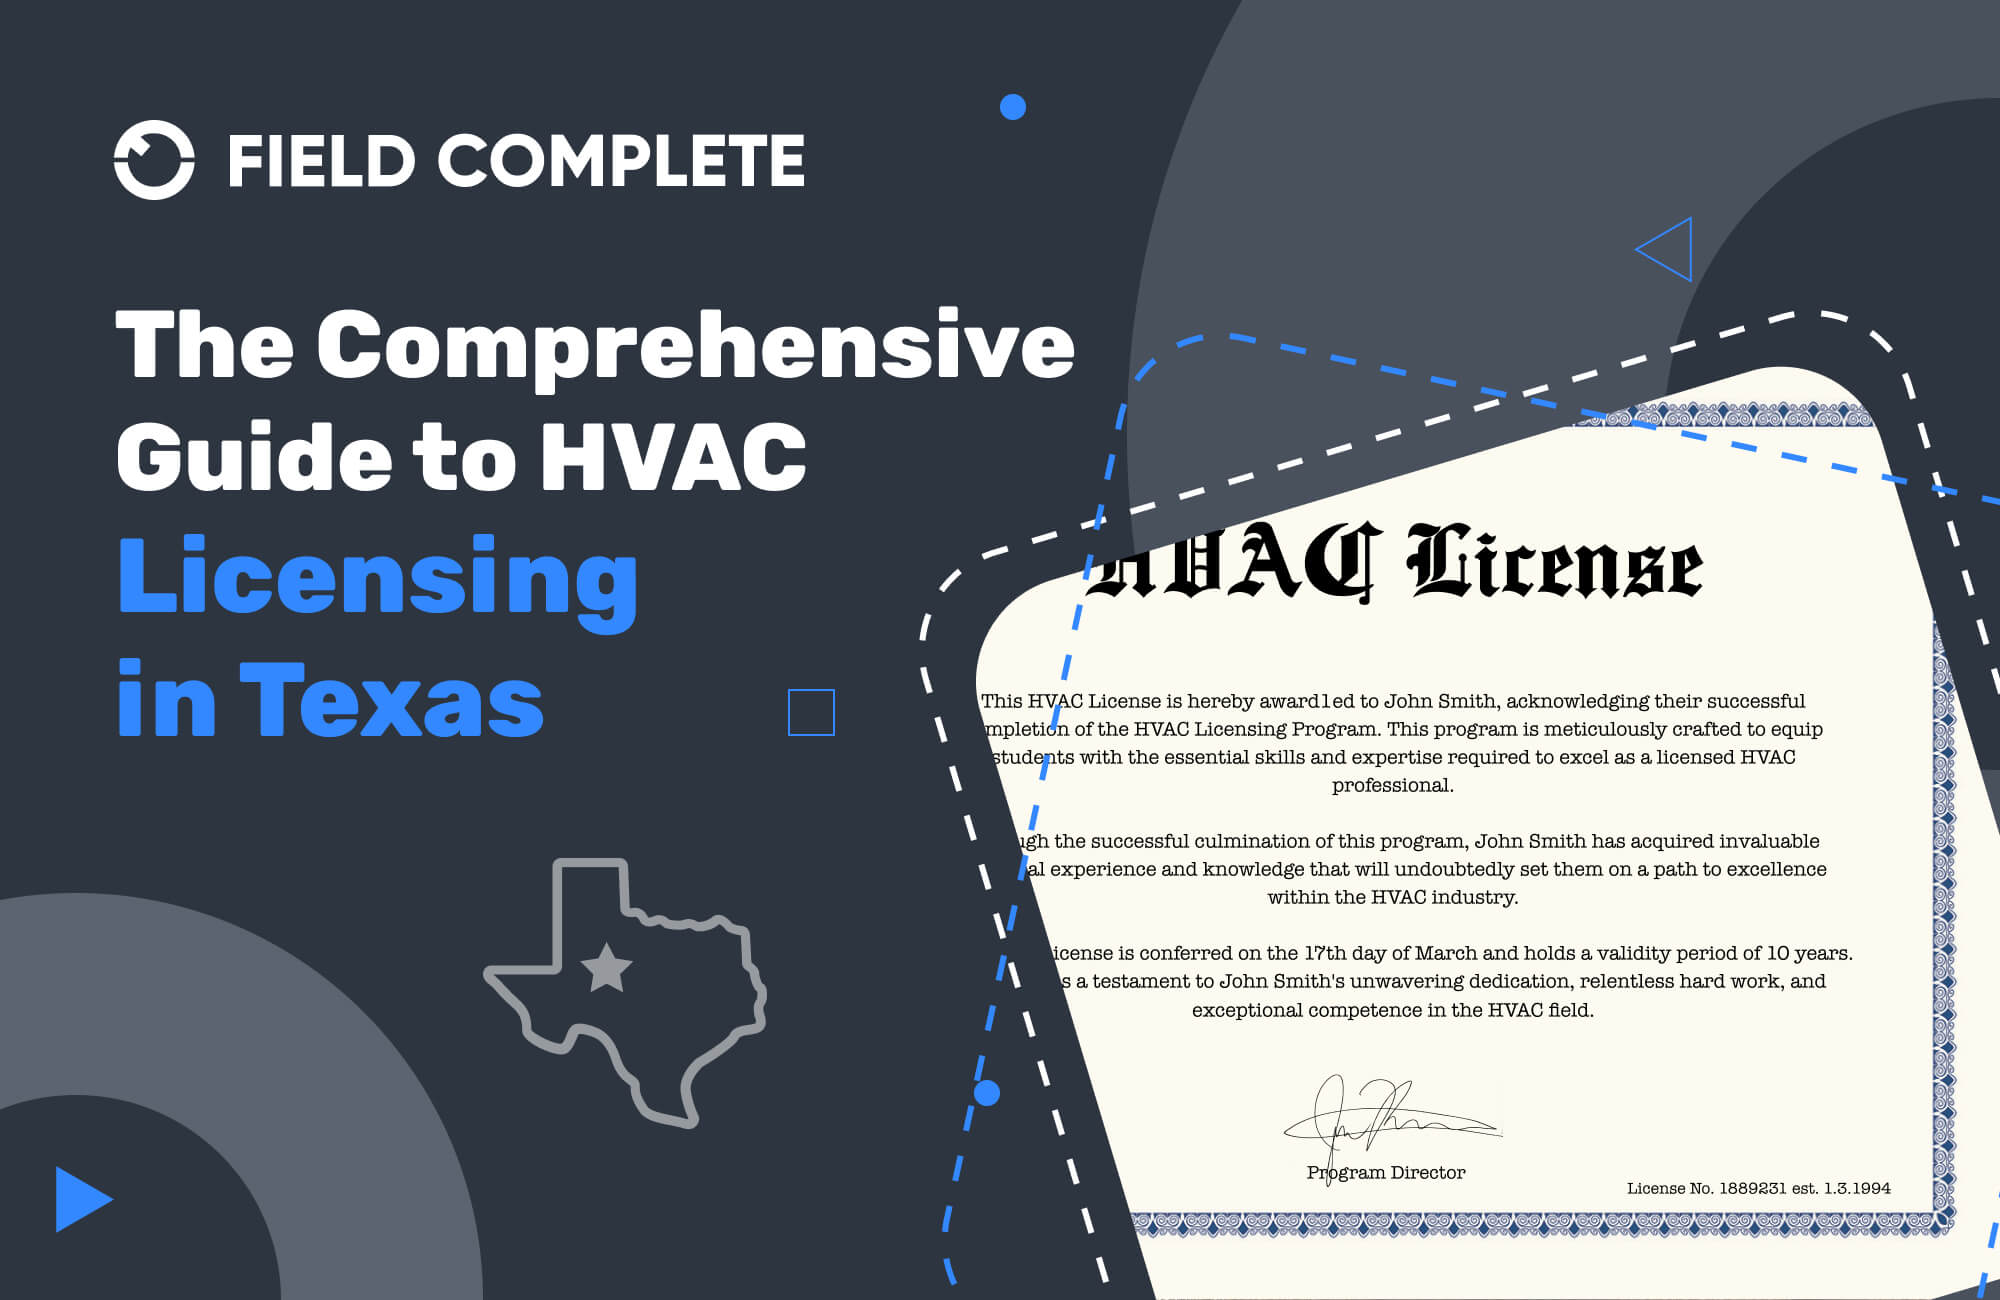 The Comprehensive Guide to HVAC Licensing in Texas